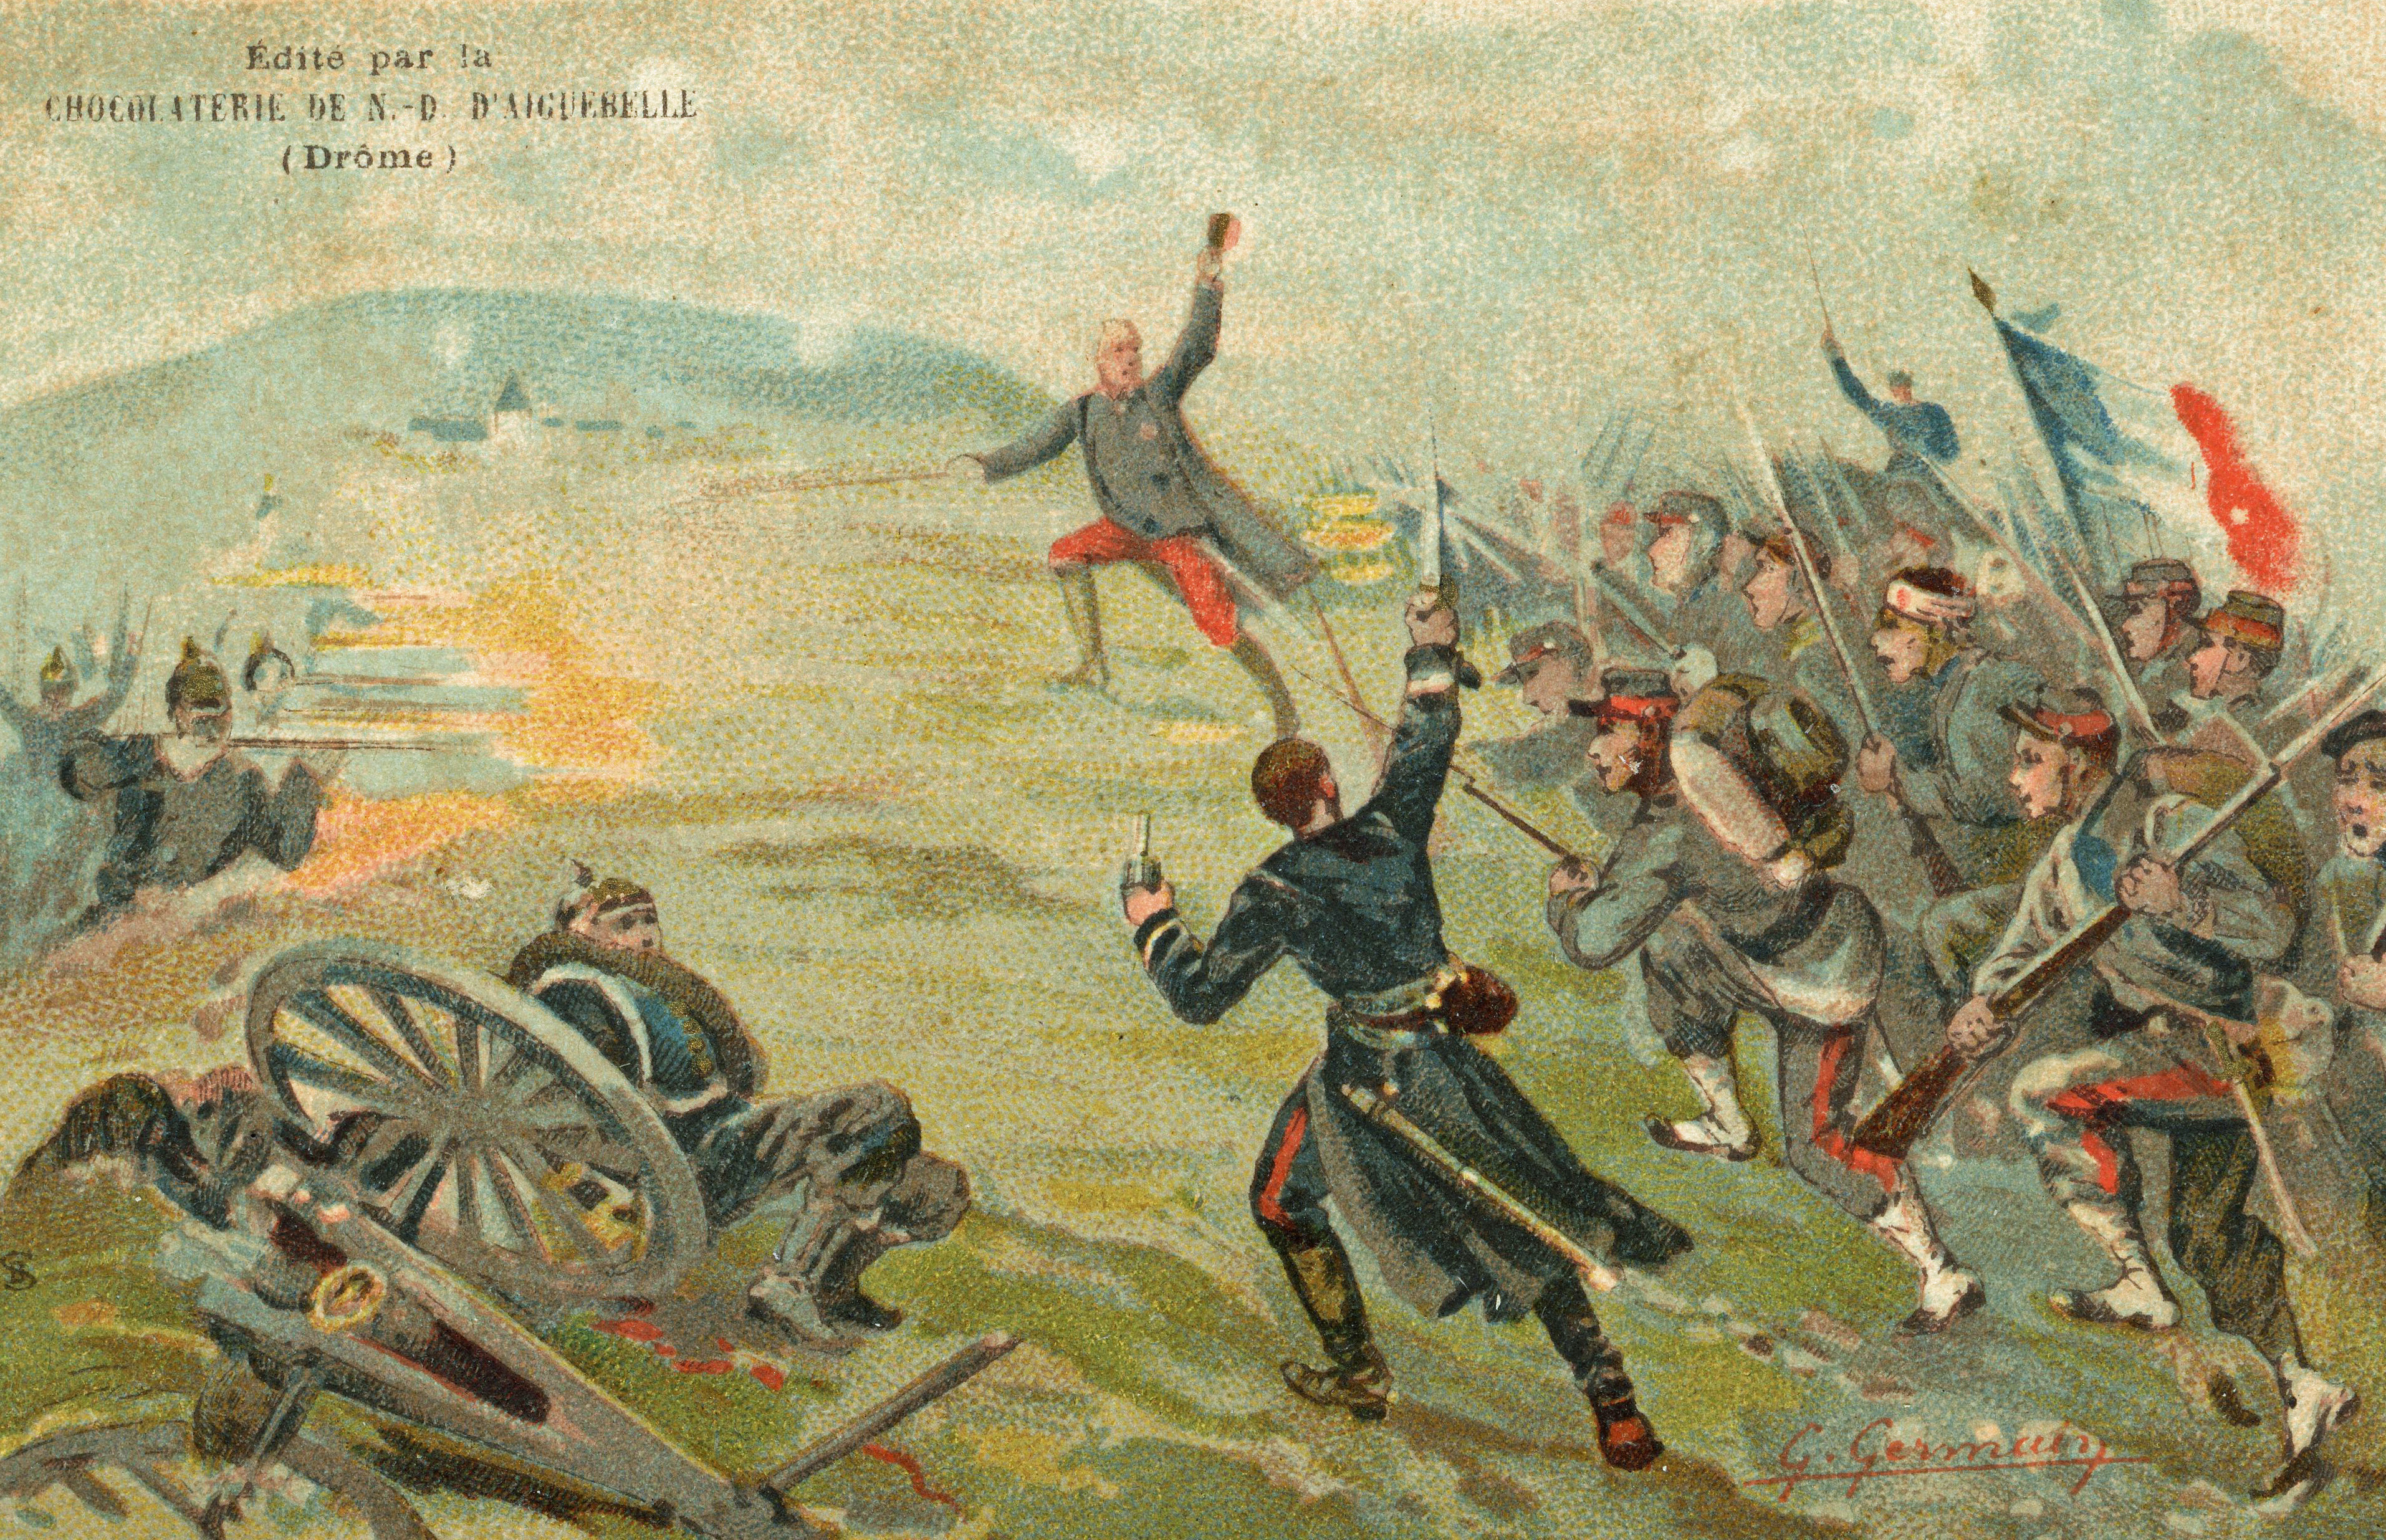 Collector card distributed by chocolatier d’Aiguebelle depicting the Battle of Le Mans and the French attack at Auvours on 11 January 1871 with General Gougeard leading the charge.